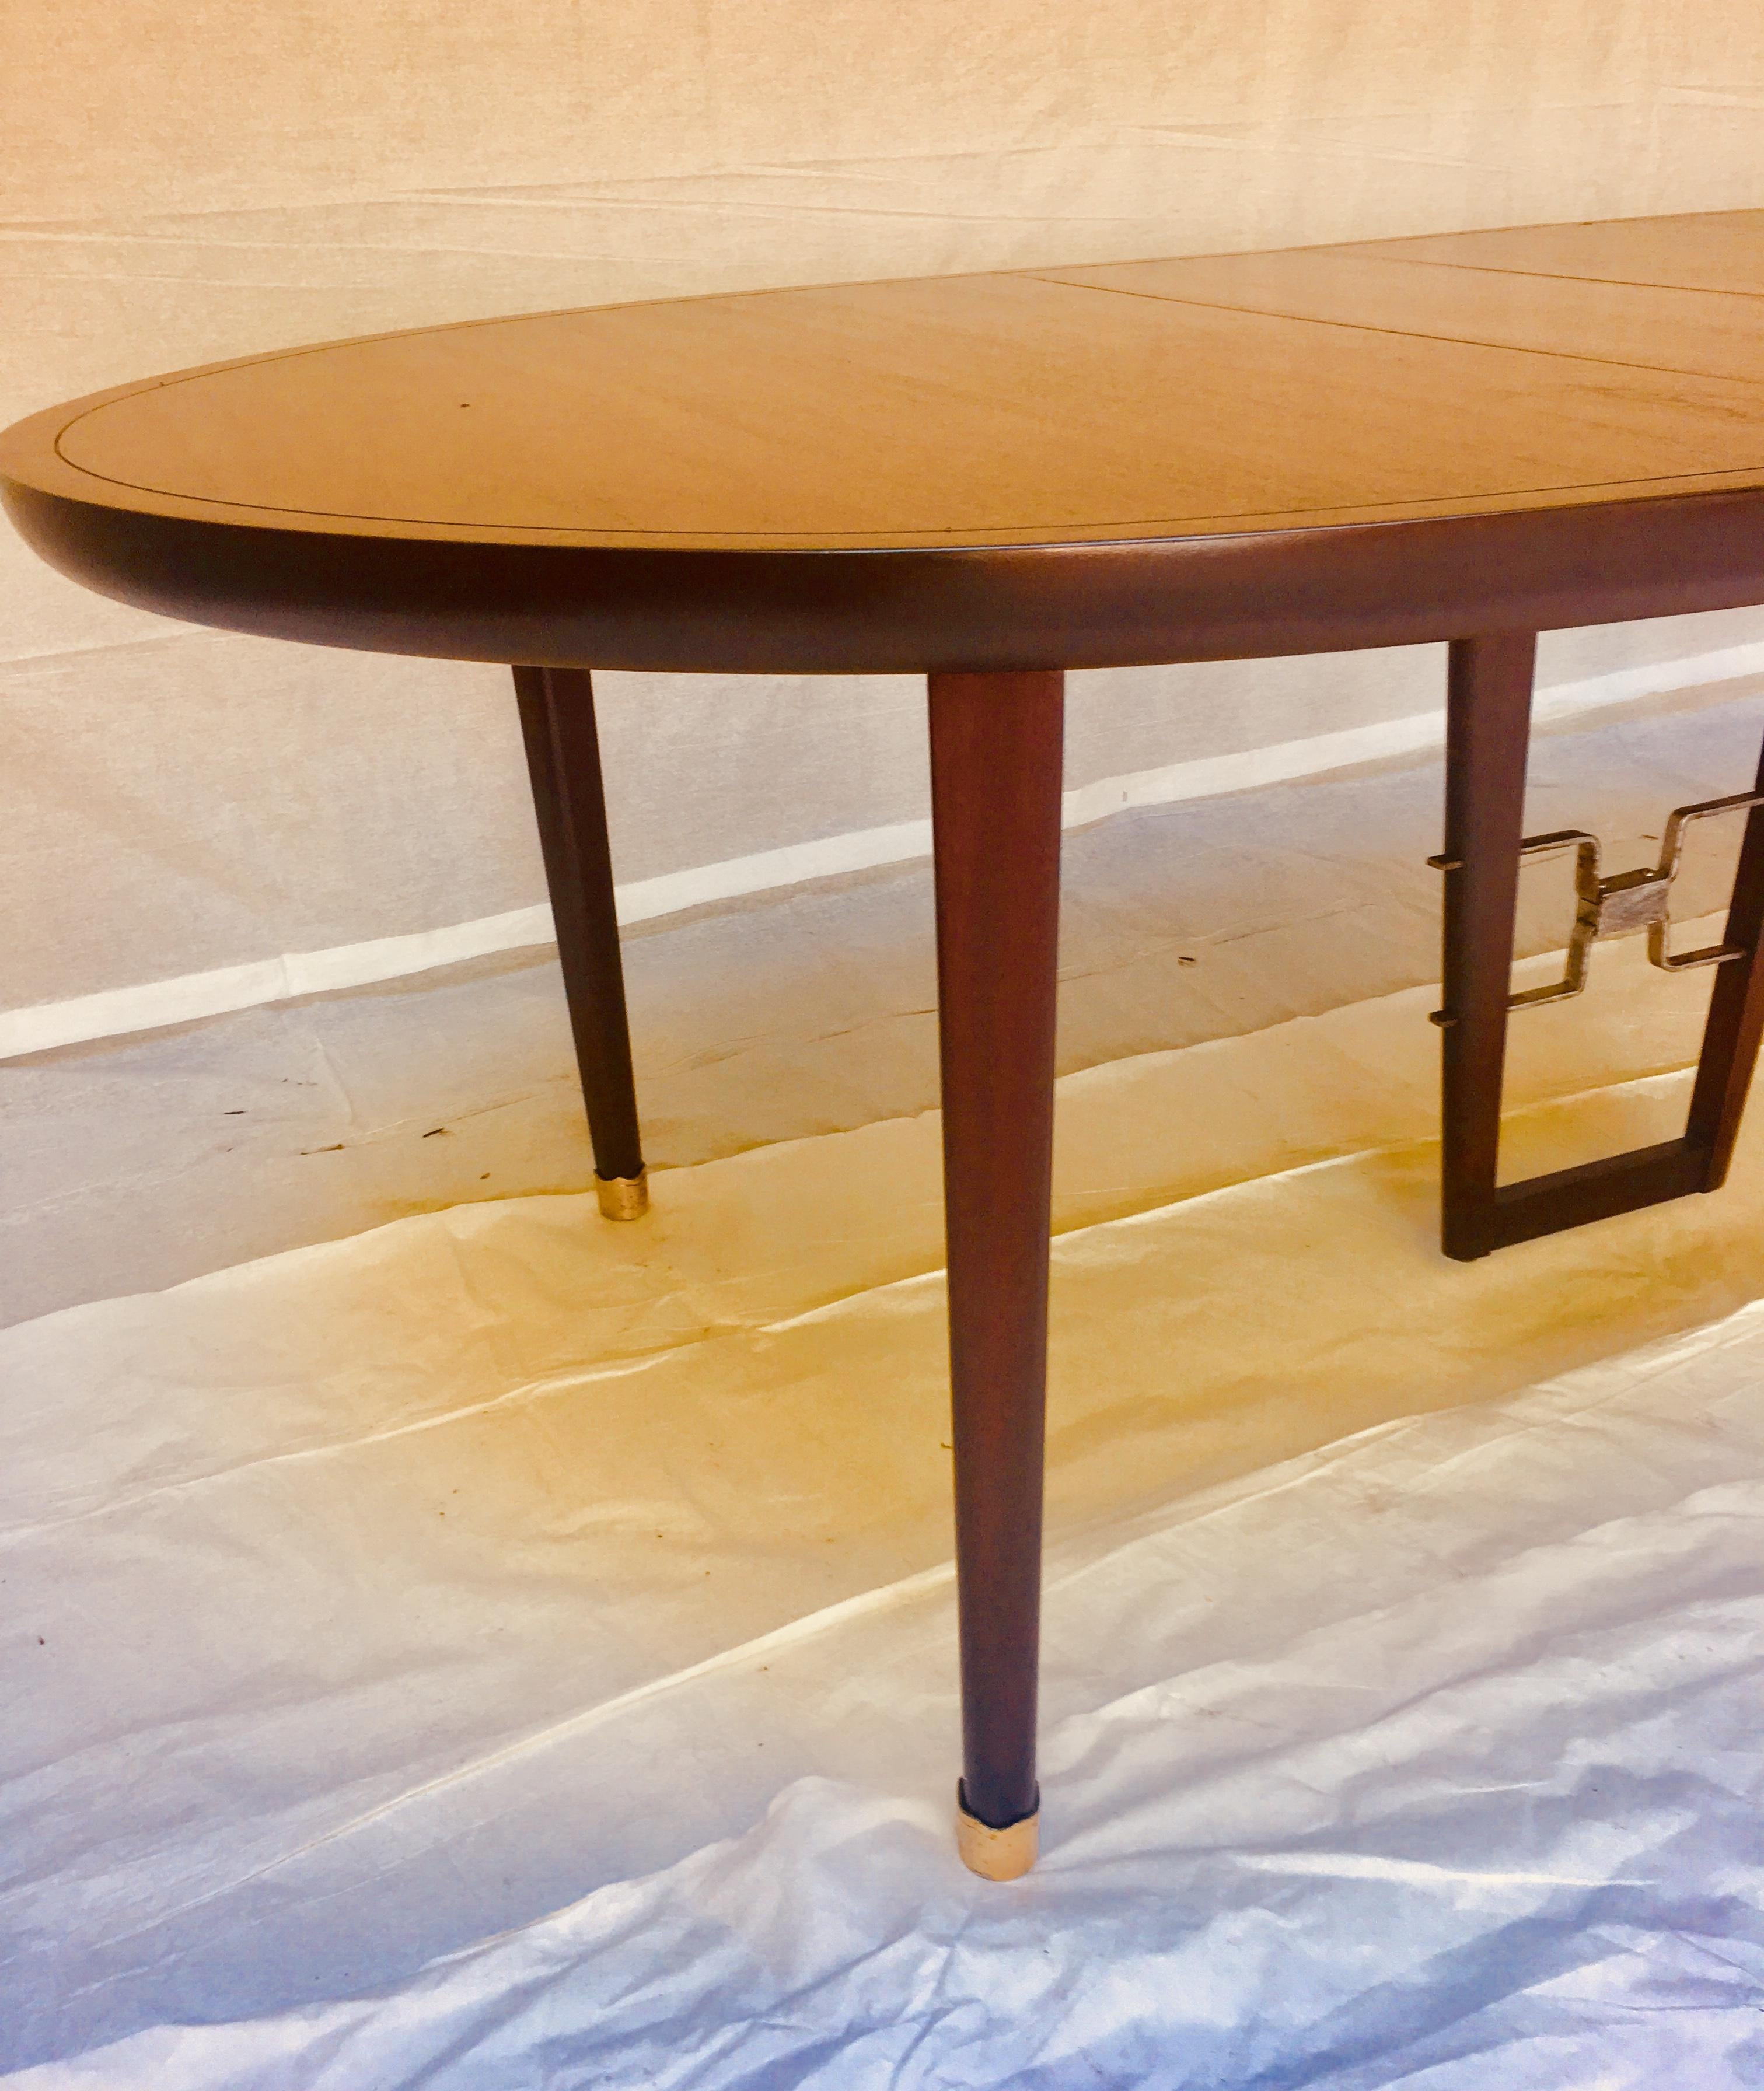 Mexican Edmond Spence Mahogany Dining Table Designed for Industria Mueblera, circa 1958 For Sale